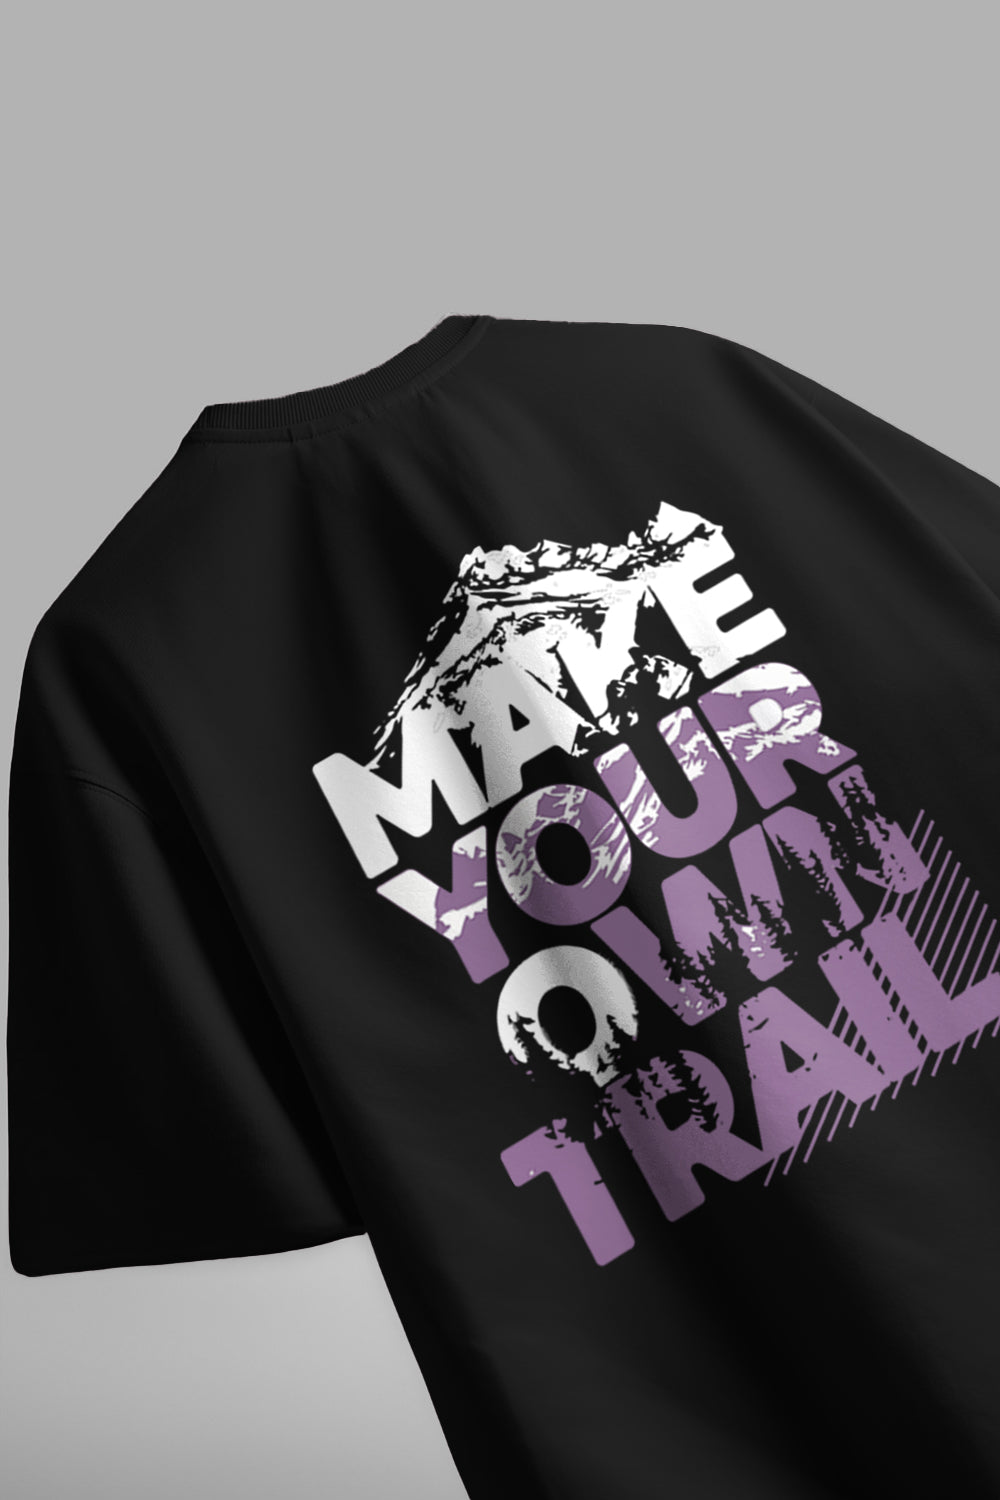 Make your Own Trail Oversized T-Shirt